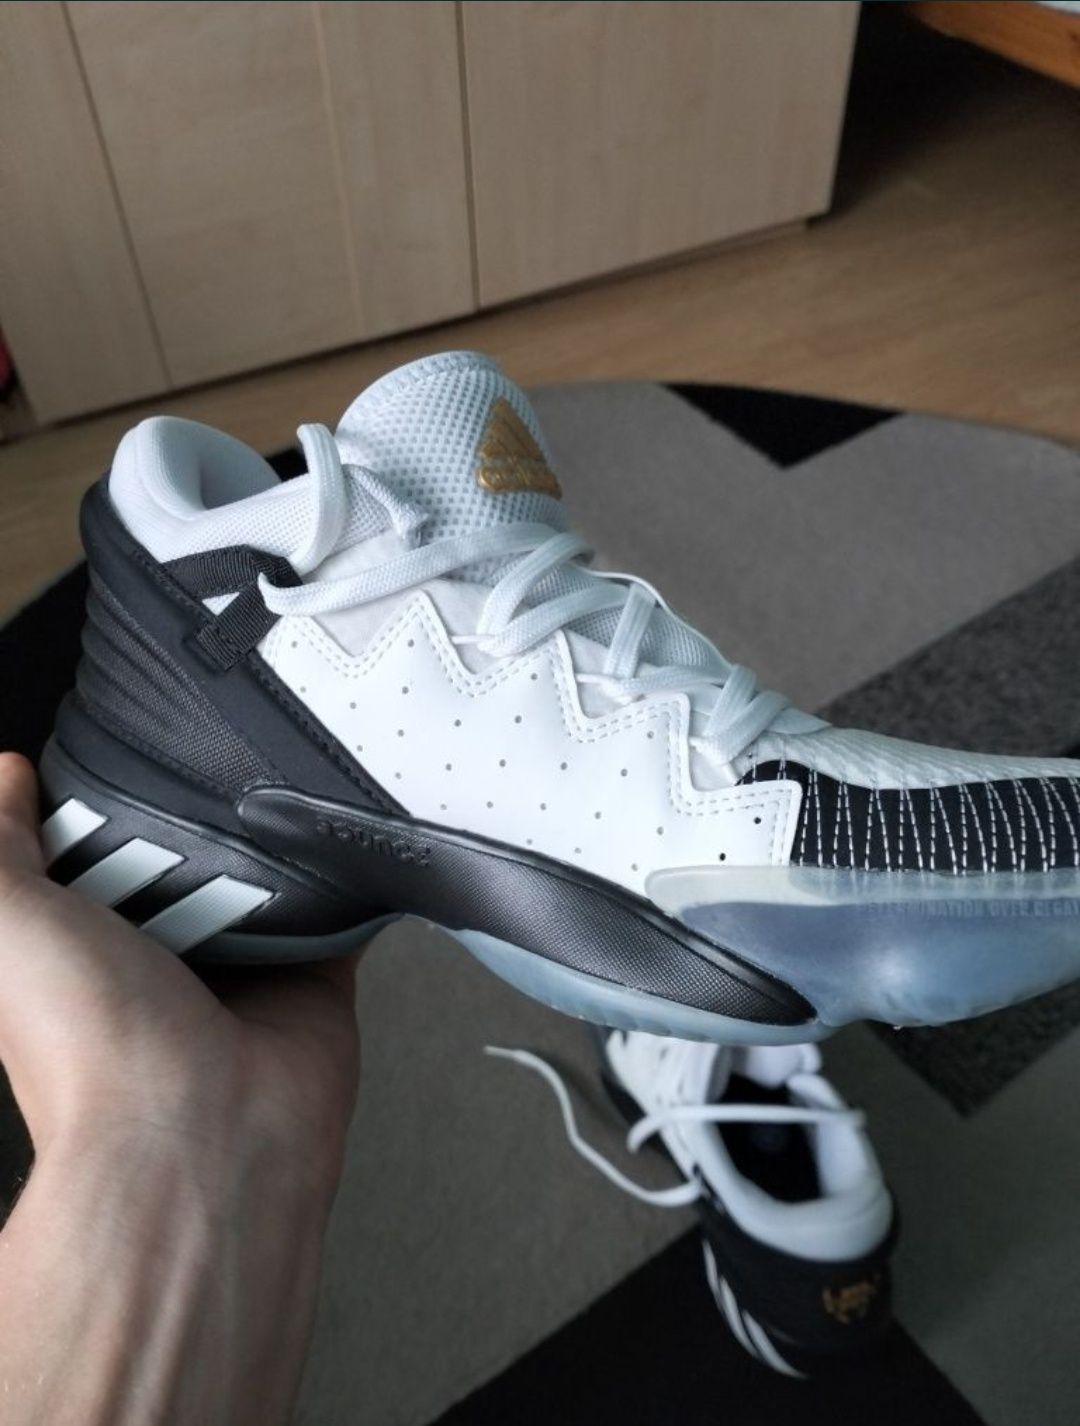 Adidas D.O.N. Issue 2 Basketball Men Shoes Black and White